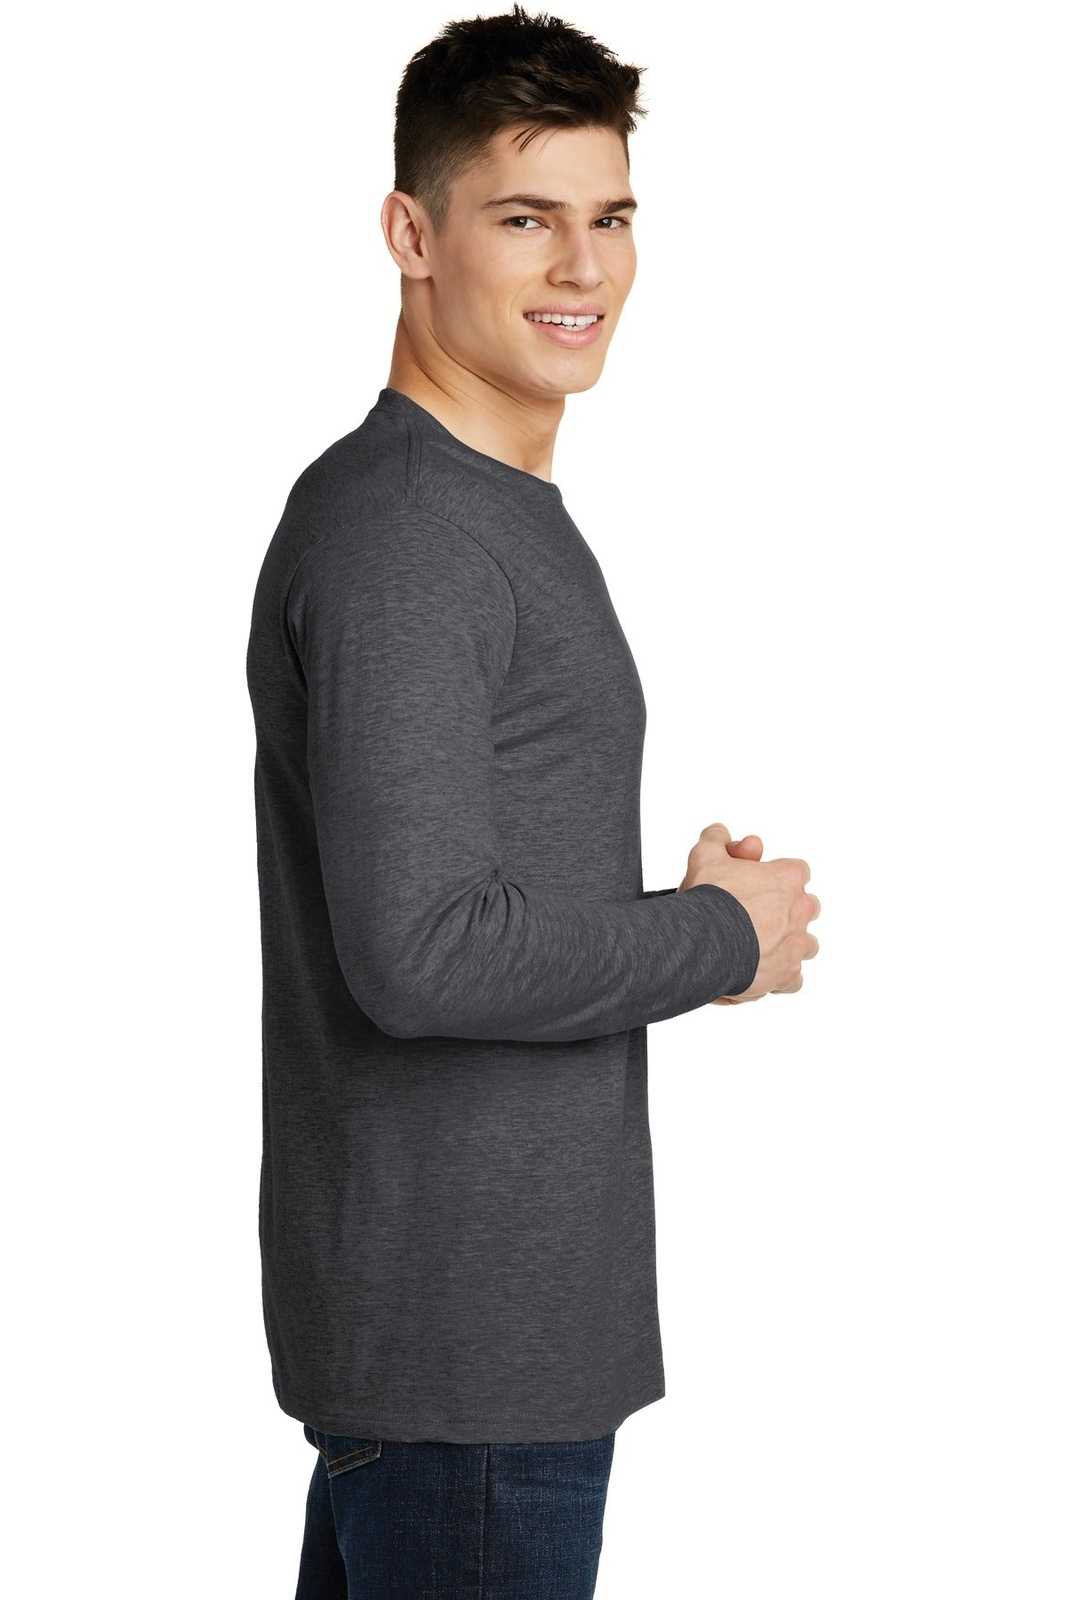 District DT6200 Very Important Tee Long Sleeve - Heathered Charcoal - HIT a Double - 3